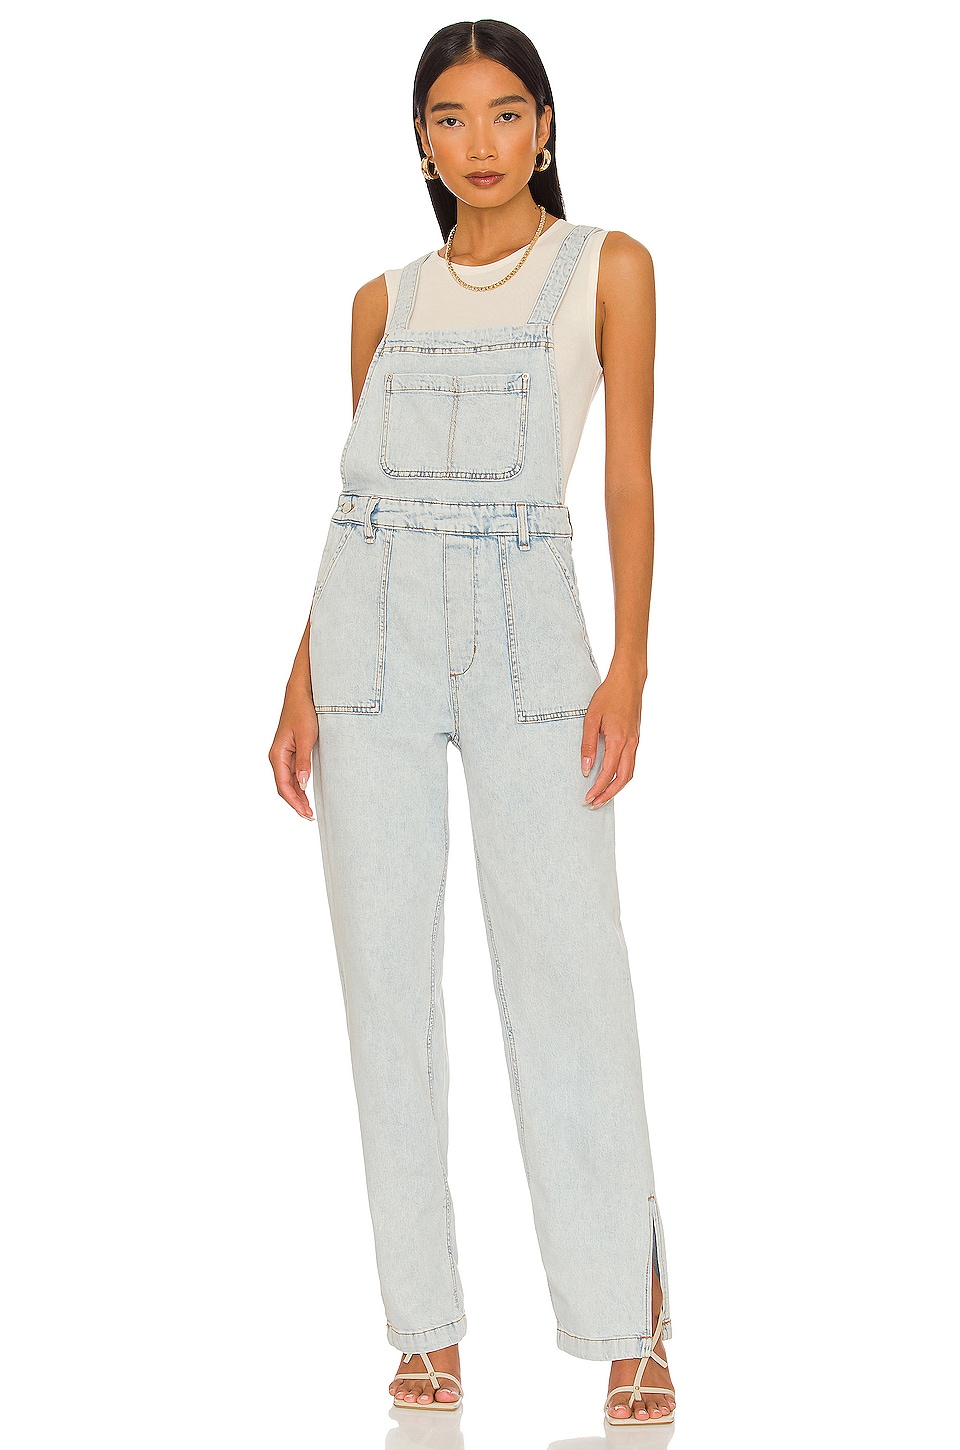 WeWoreWhat Slouchy Slit Overalls in Super Light | REVOLVE